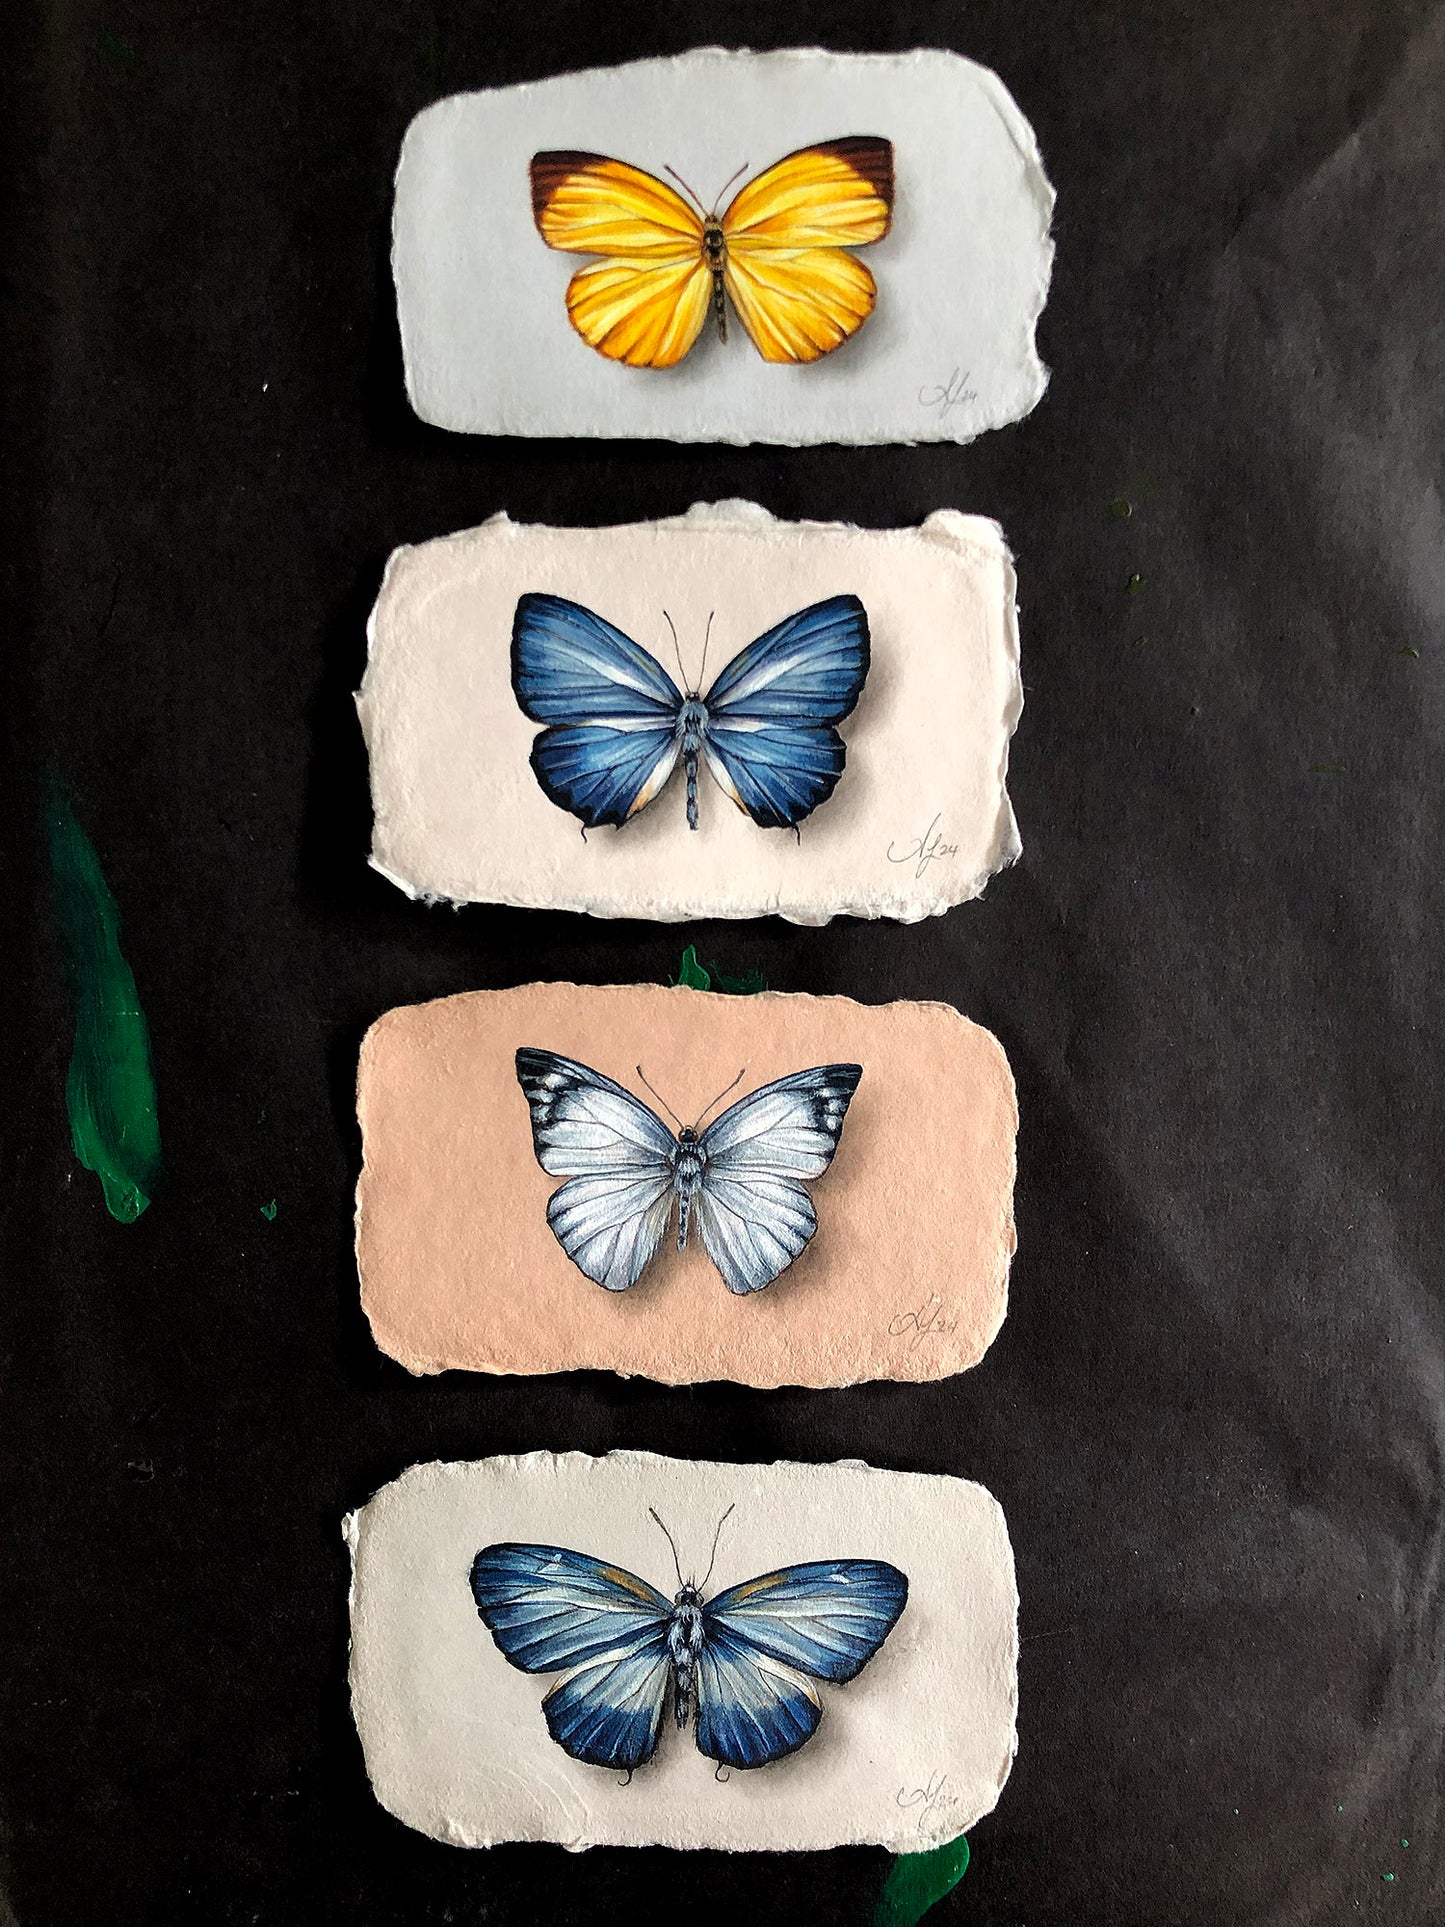 Butterfly on Handmade Paper #5 - 4.5 x 2.5"